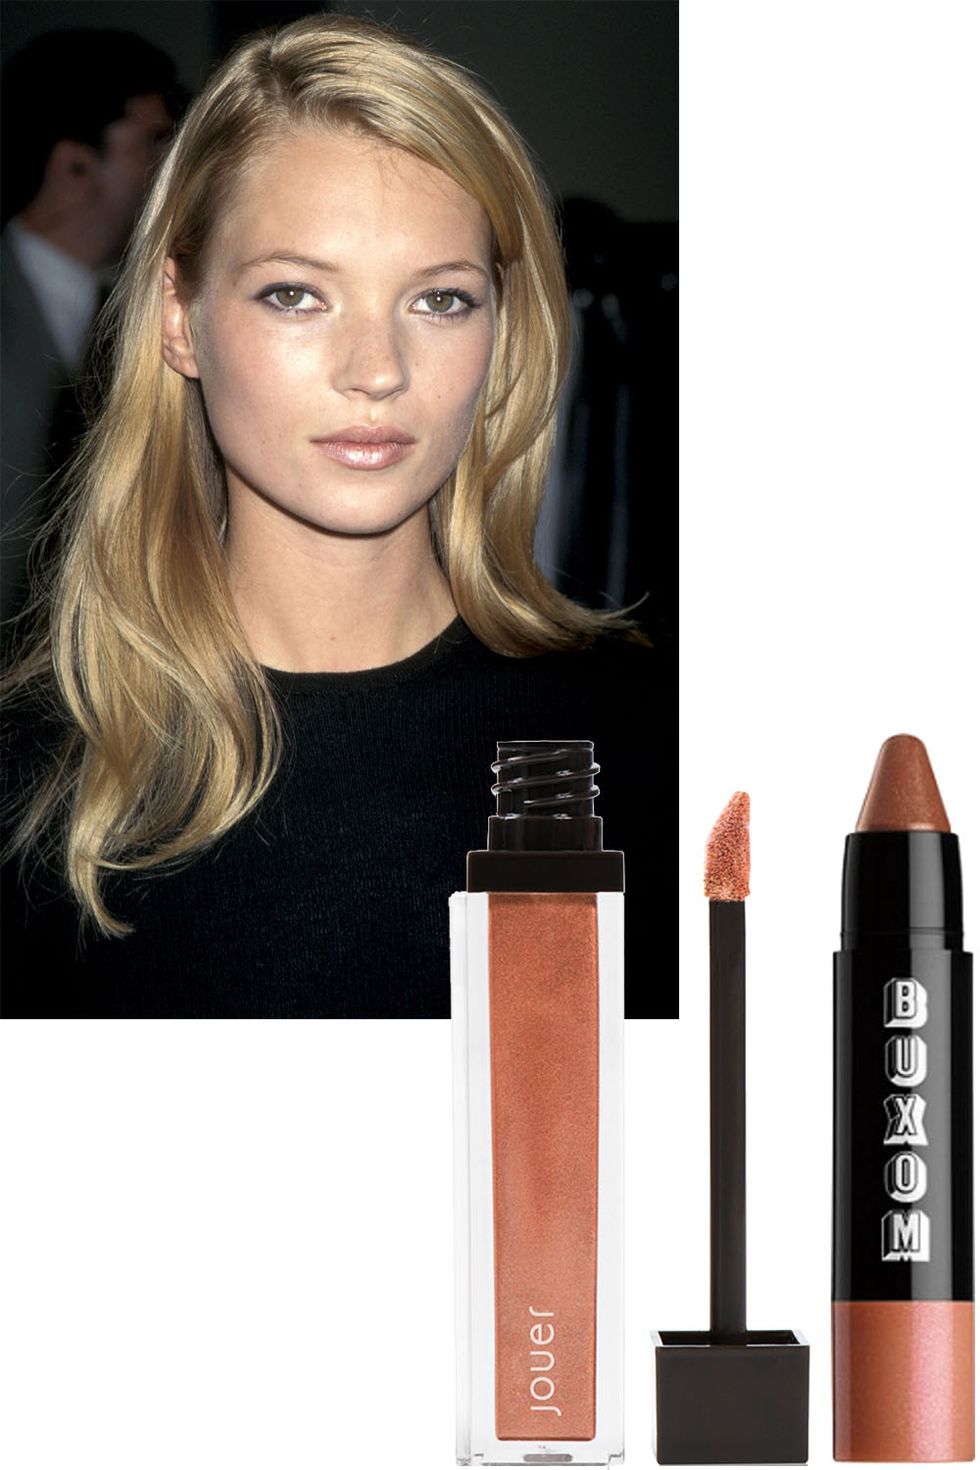 <p>We know what you're thinking: frosty lipstick? Really? But then look at this picture of Kate Moss and think again. With a relatively bare face, a nude lipstick with a hint of shimmer is all you need to achieve those coveted&nbsp;'90s supermodel vibes. If you prefer a glossier texture, try the new Jouer liquid lipstick in Penny, a metallic copper. Or if you like the ease of a pencil, Buxom's Shimmer Shock pencils&nbsp;feels as balmy and hydrating as a&nbsp;gloss.
</p><p><em data-redactor-tag="em" data-verified="redactor">Jouer Long-Wear Lip Crème Liquid Lipstick in Penny, $18, <a href="https://www.jouercosmetics.com/shop-products/lips/liquid-lipstick?id=538">jouer.com</a>,&nbsp;Buxom Shimmer Shock Lipstick in Volatile, $18, </em><a href="http://www.ulta.com/shimmer-shock-lipstick?productId=xlsImpprod14301051#"><em data-redactor-tag="em" data-verified="redactor">ulta.com</em></a></p>